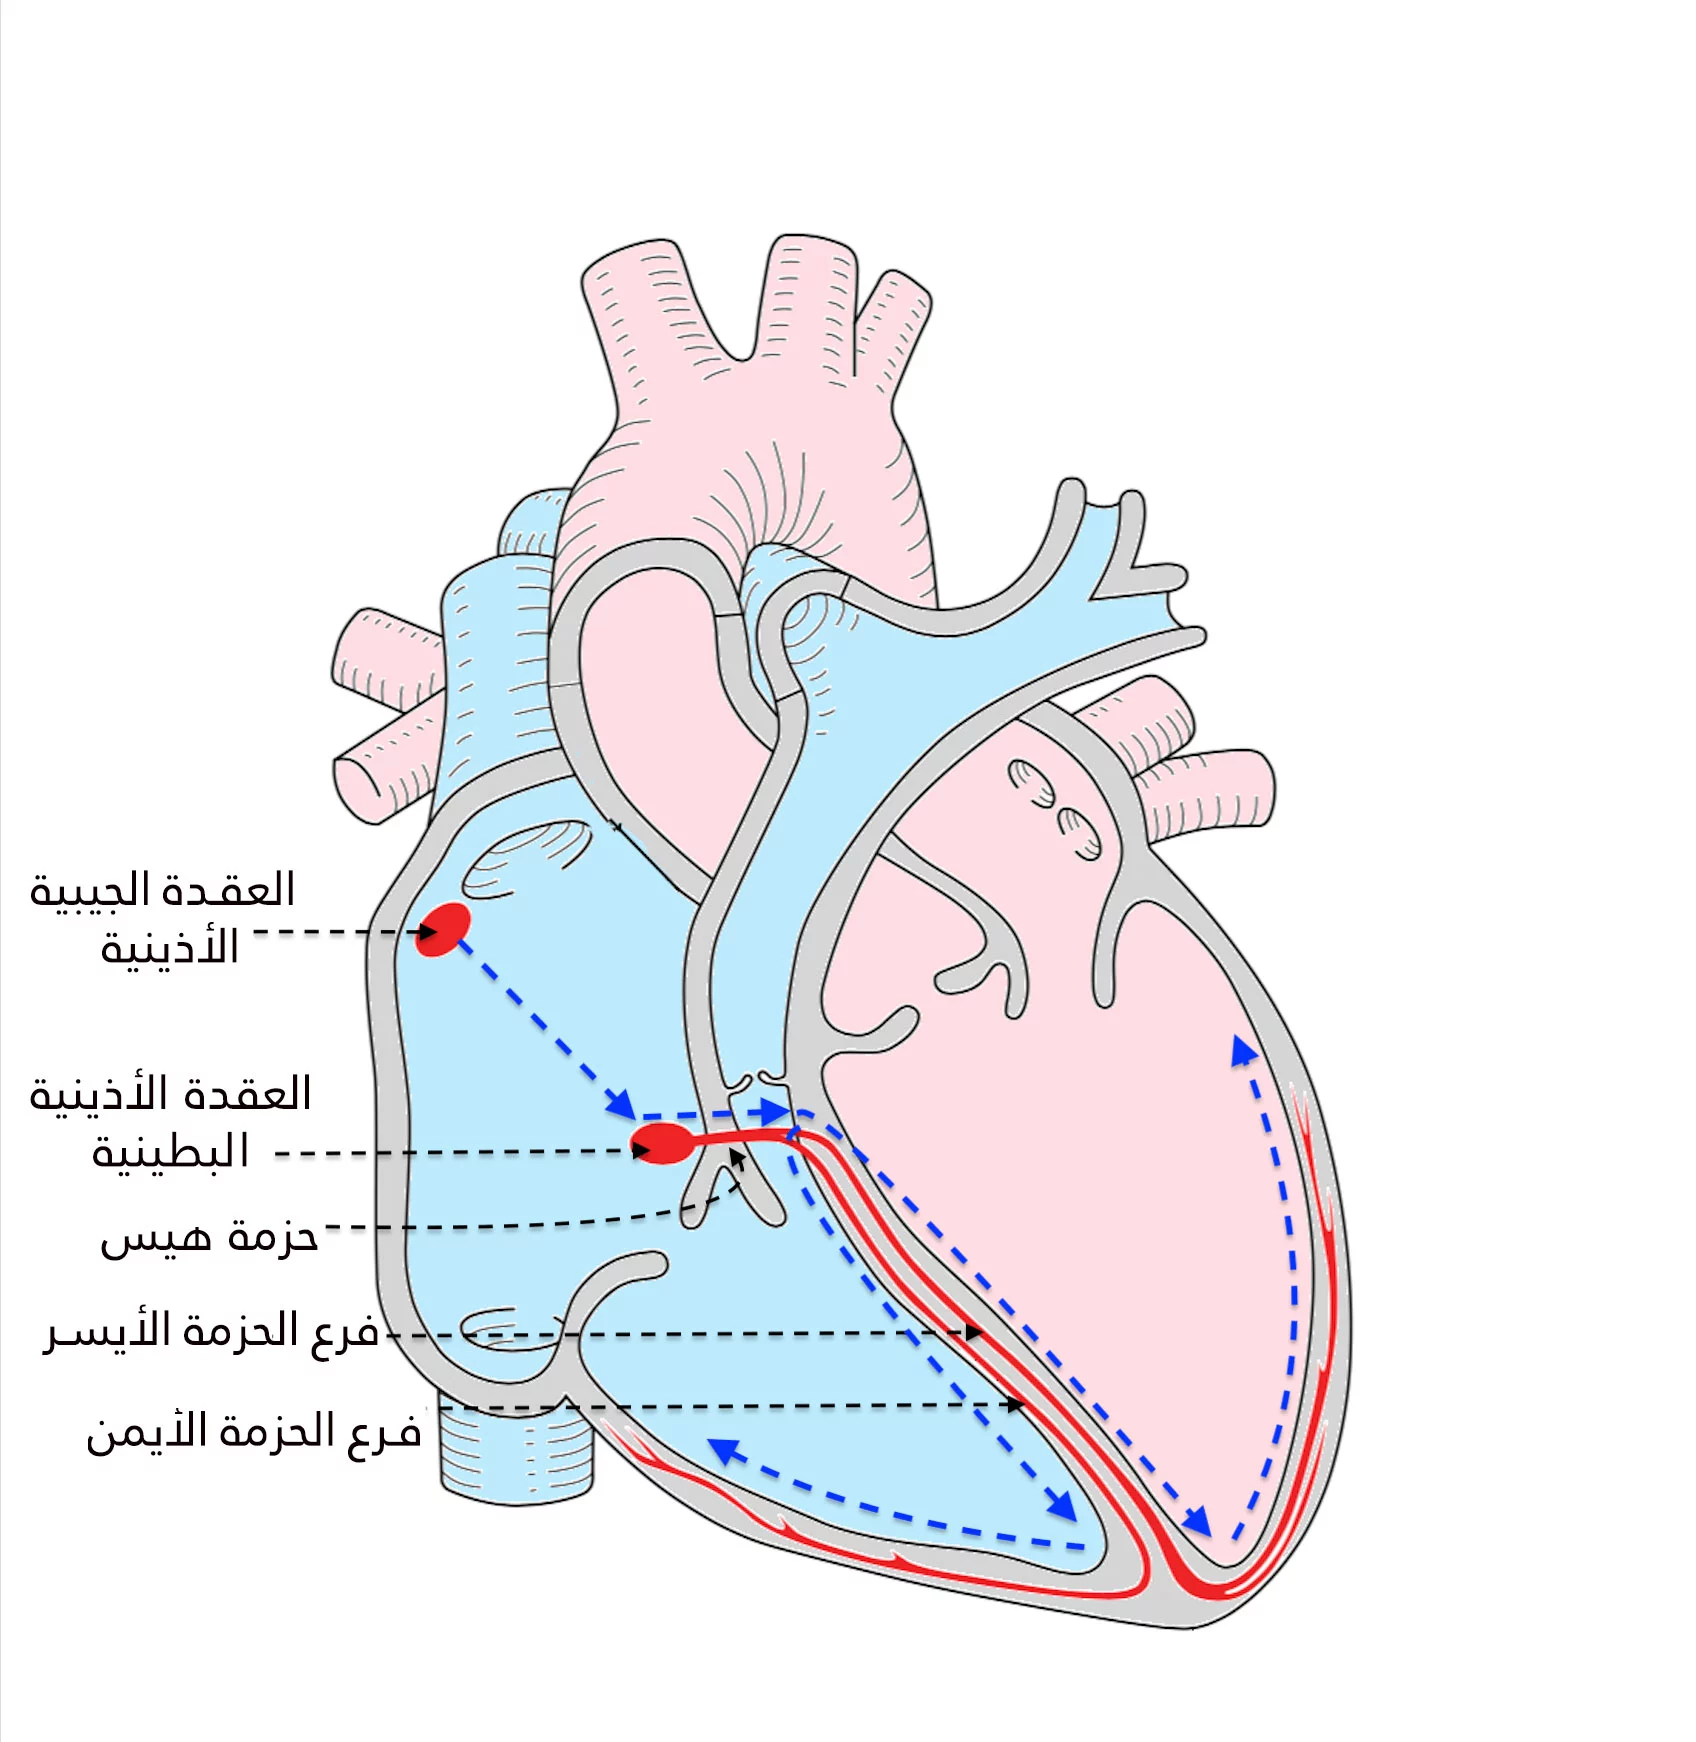 The SA node generates electrical impulses that are transmitted to the AV node and from there to all parts of the heart through special bundles.